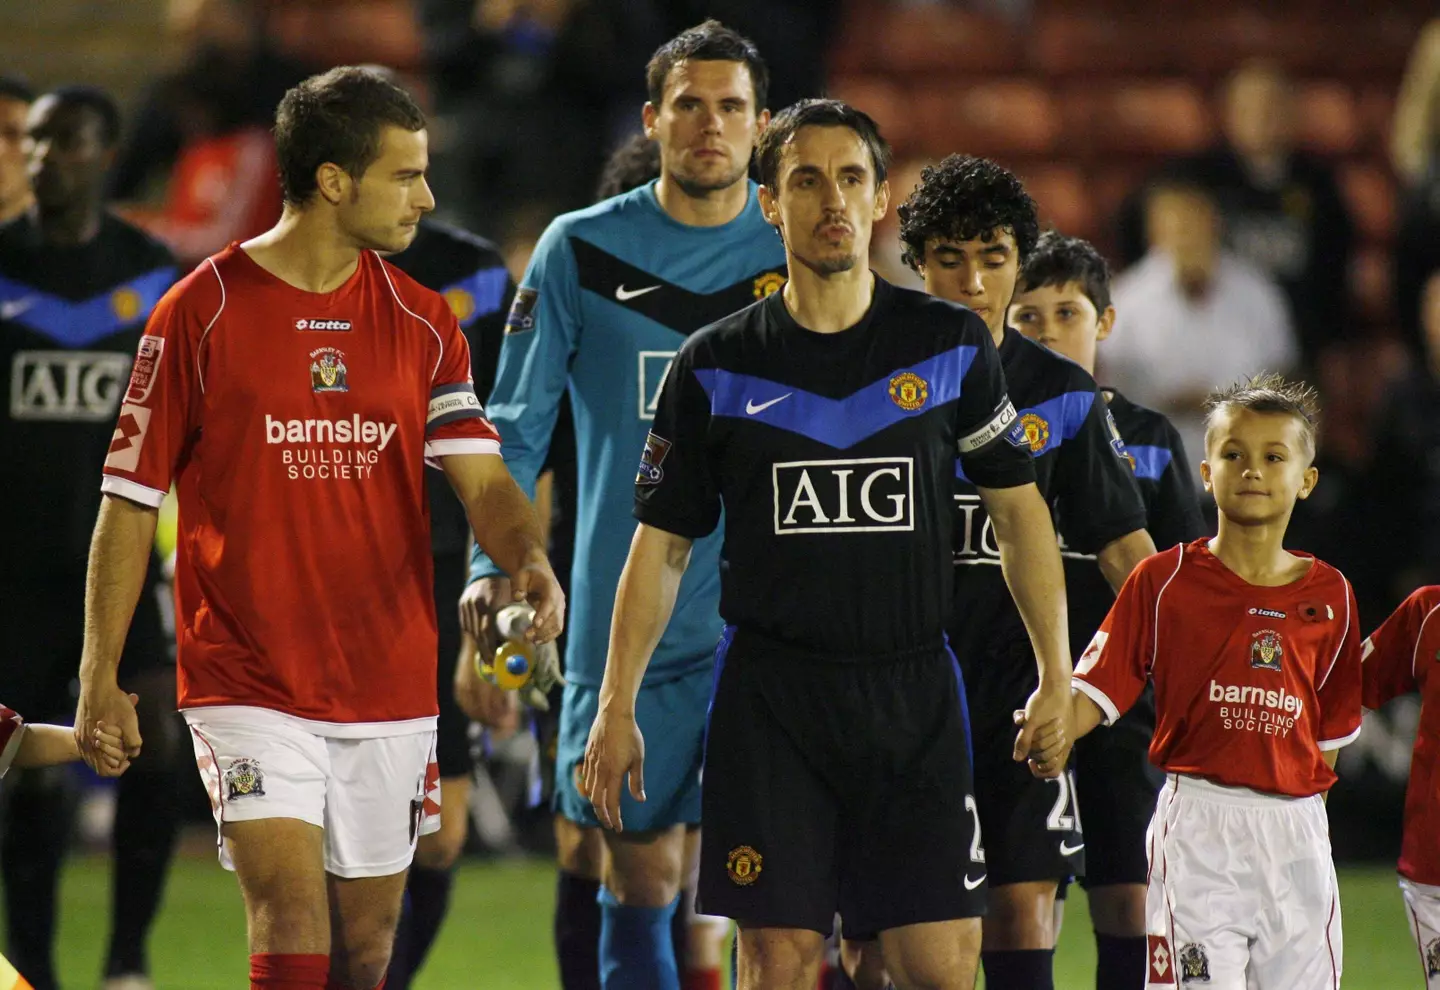 Foster approached Neville for contract advice while at Manchester United (Image: Alamy)